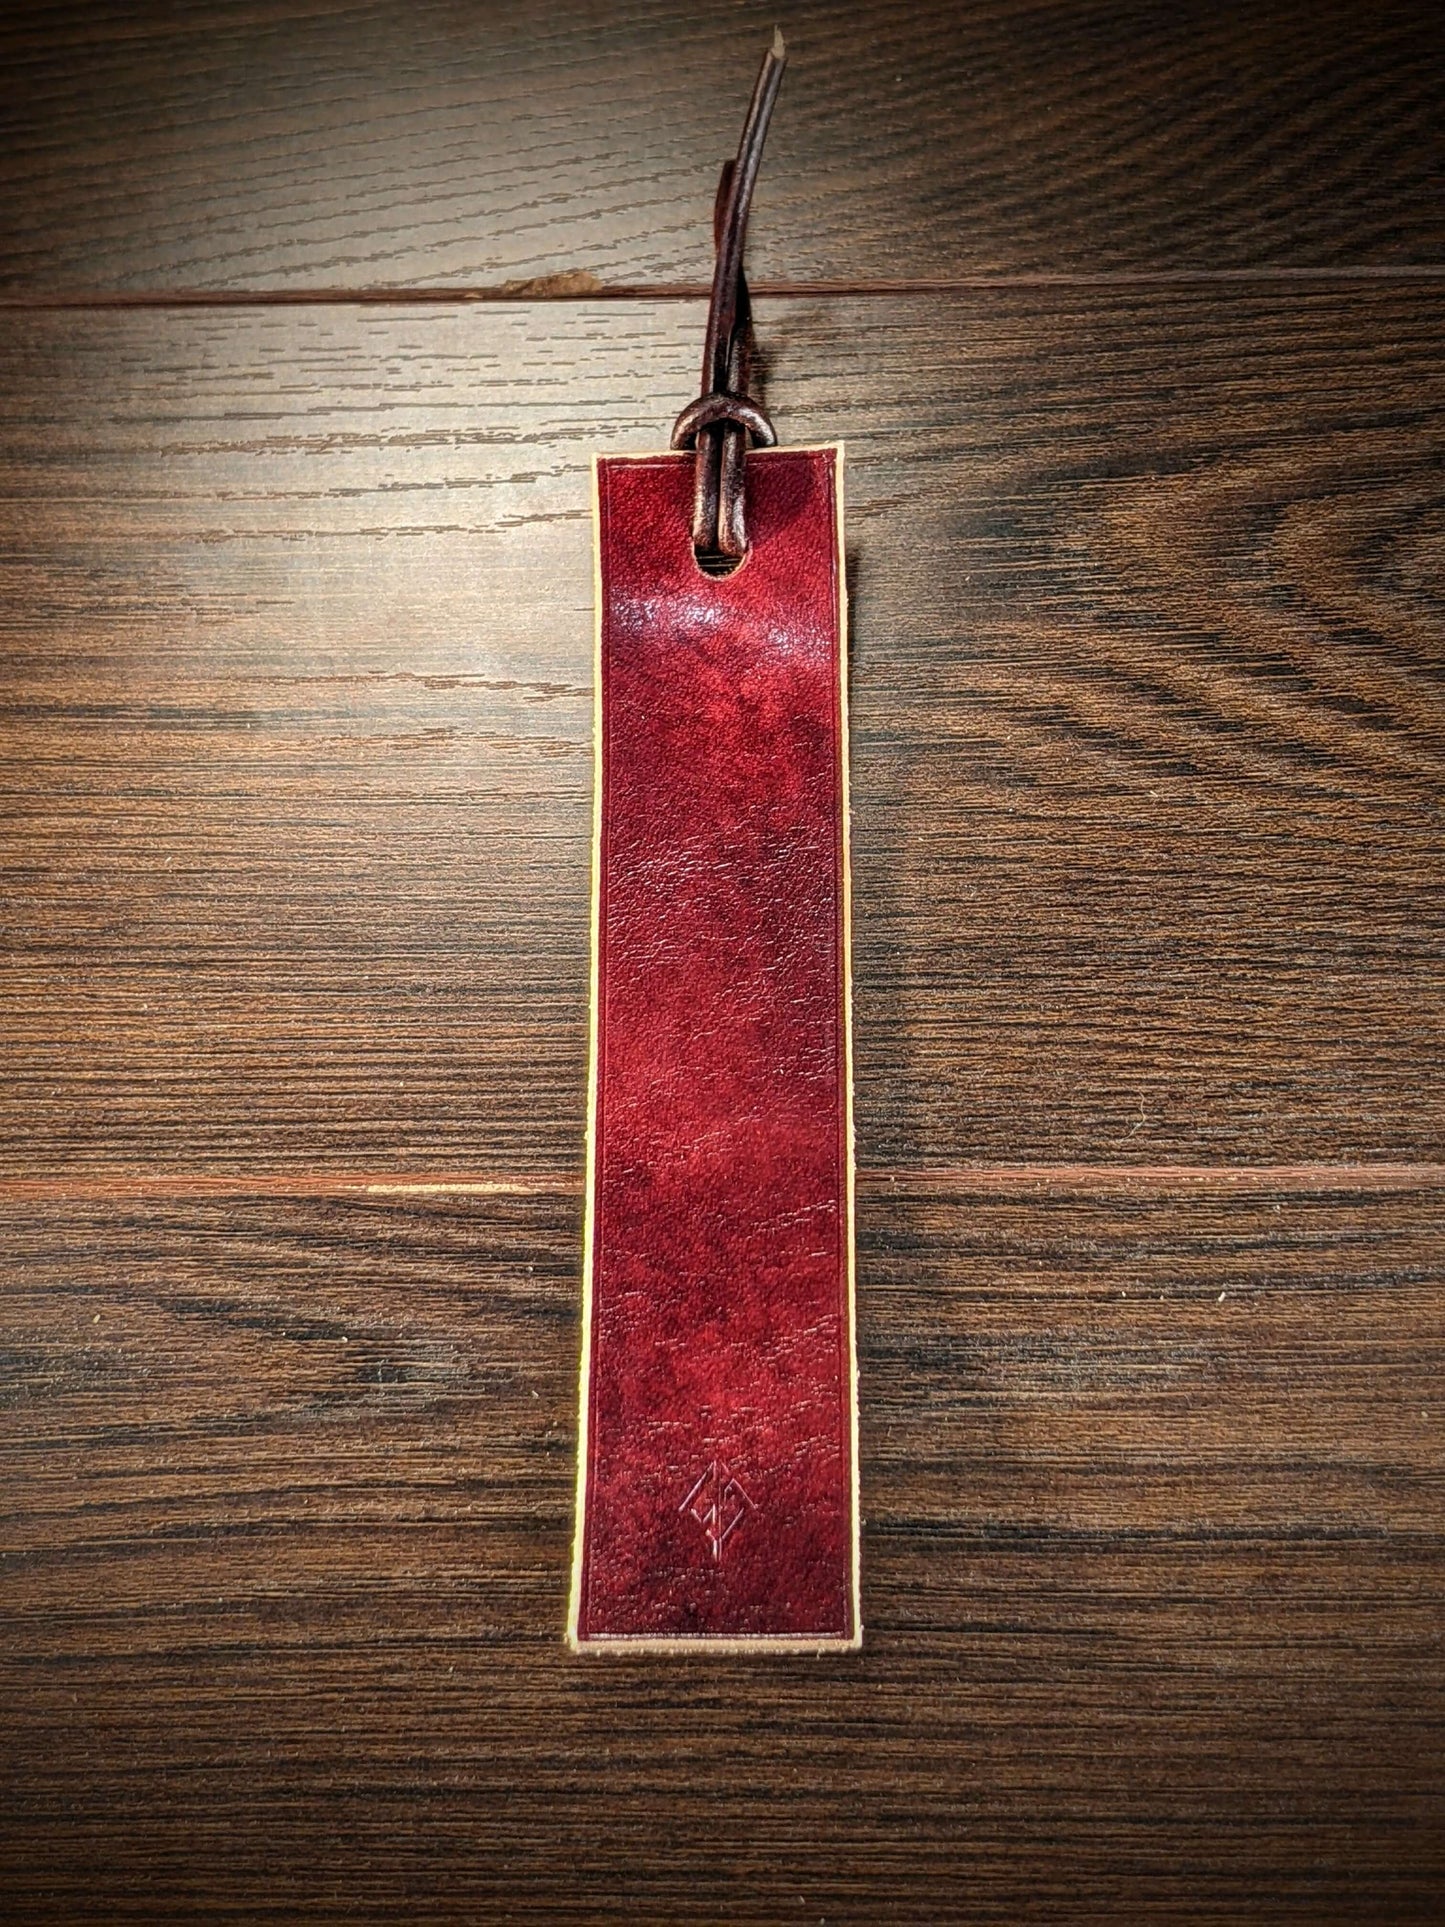 The VG Bookmark